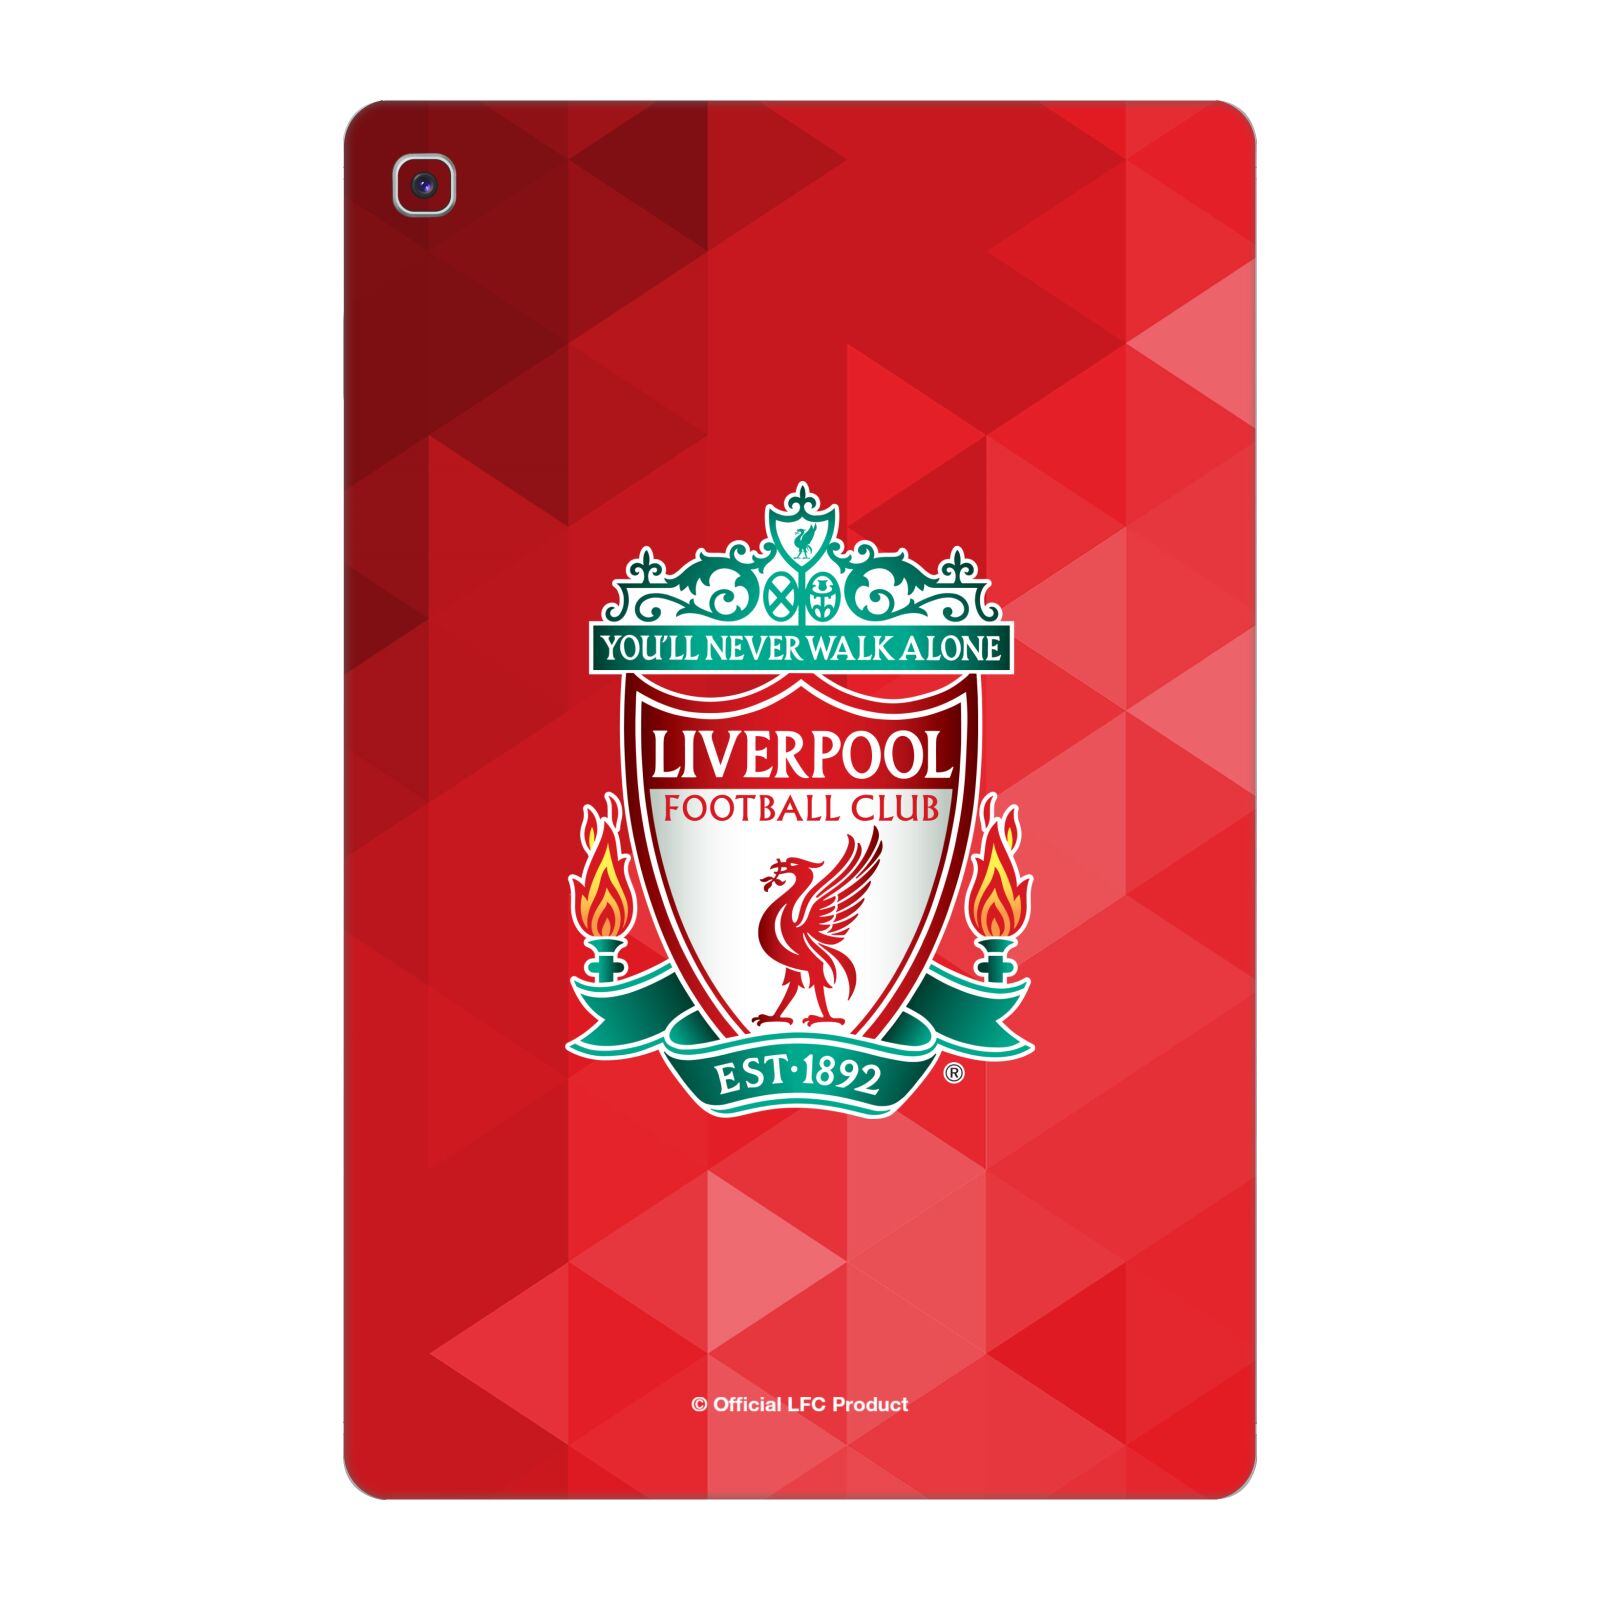 OFFICIAL LIVERPOOL FOOTBALL CLUB ART VINYL SKIN DECAL FOR APPLE iPHONE  PHONES